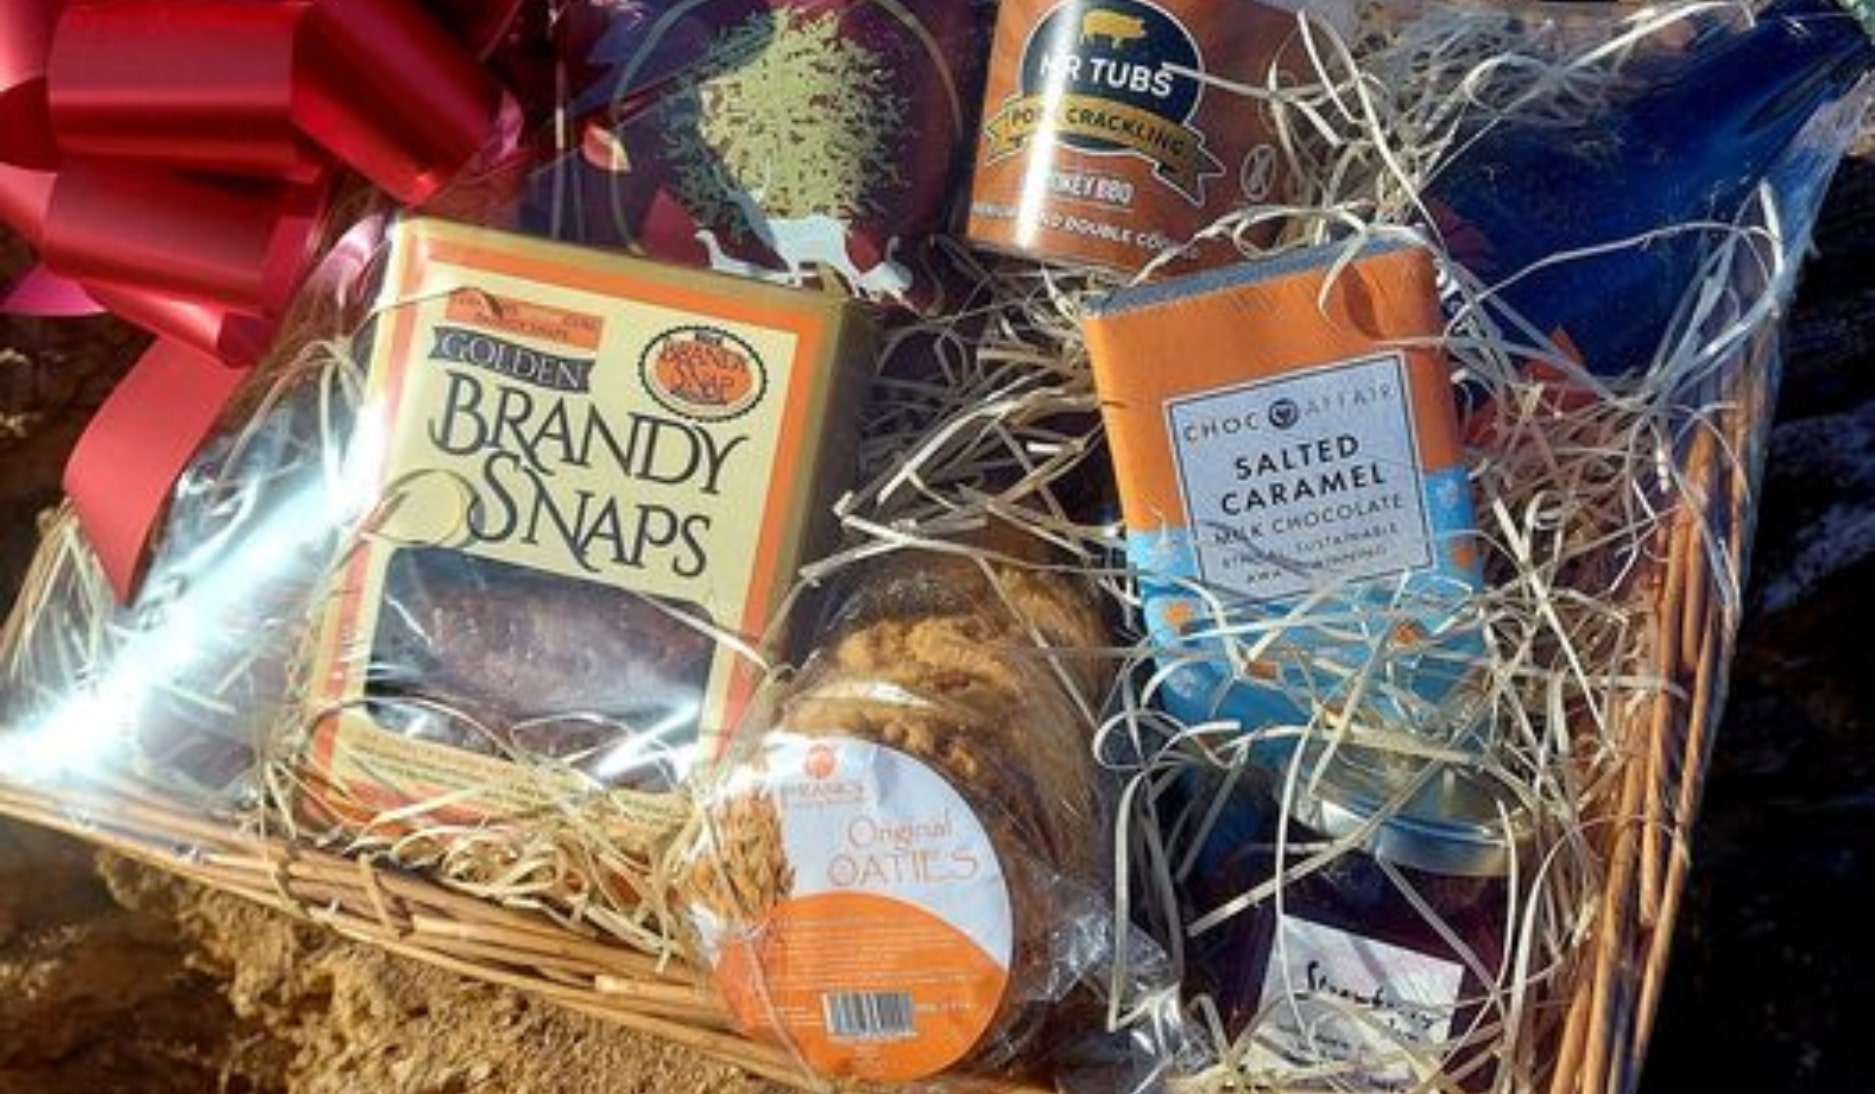 A wooden basket with brandy snaps, chocolate, and other food products inside